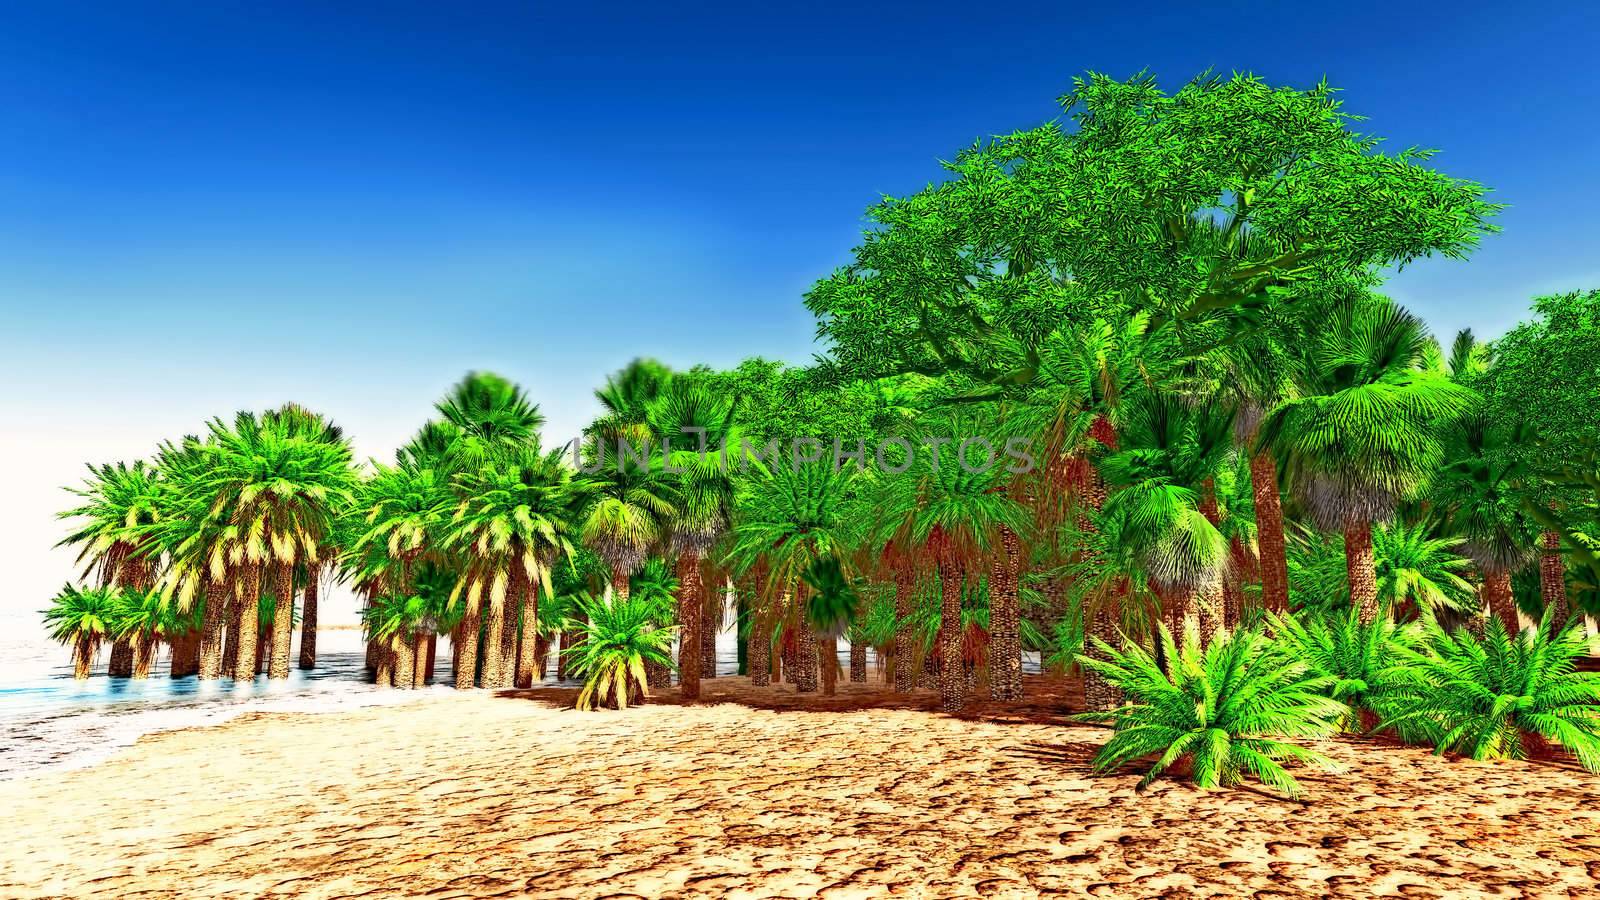 Beautiful natural background - oasis